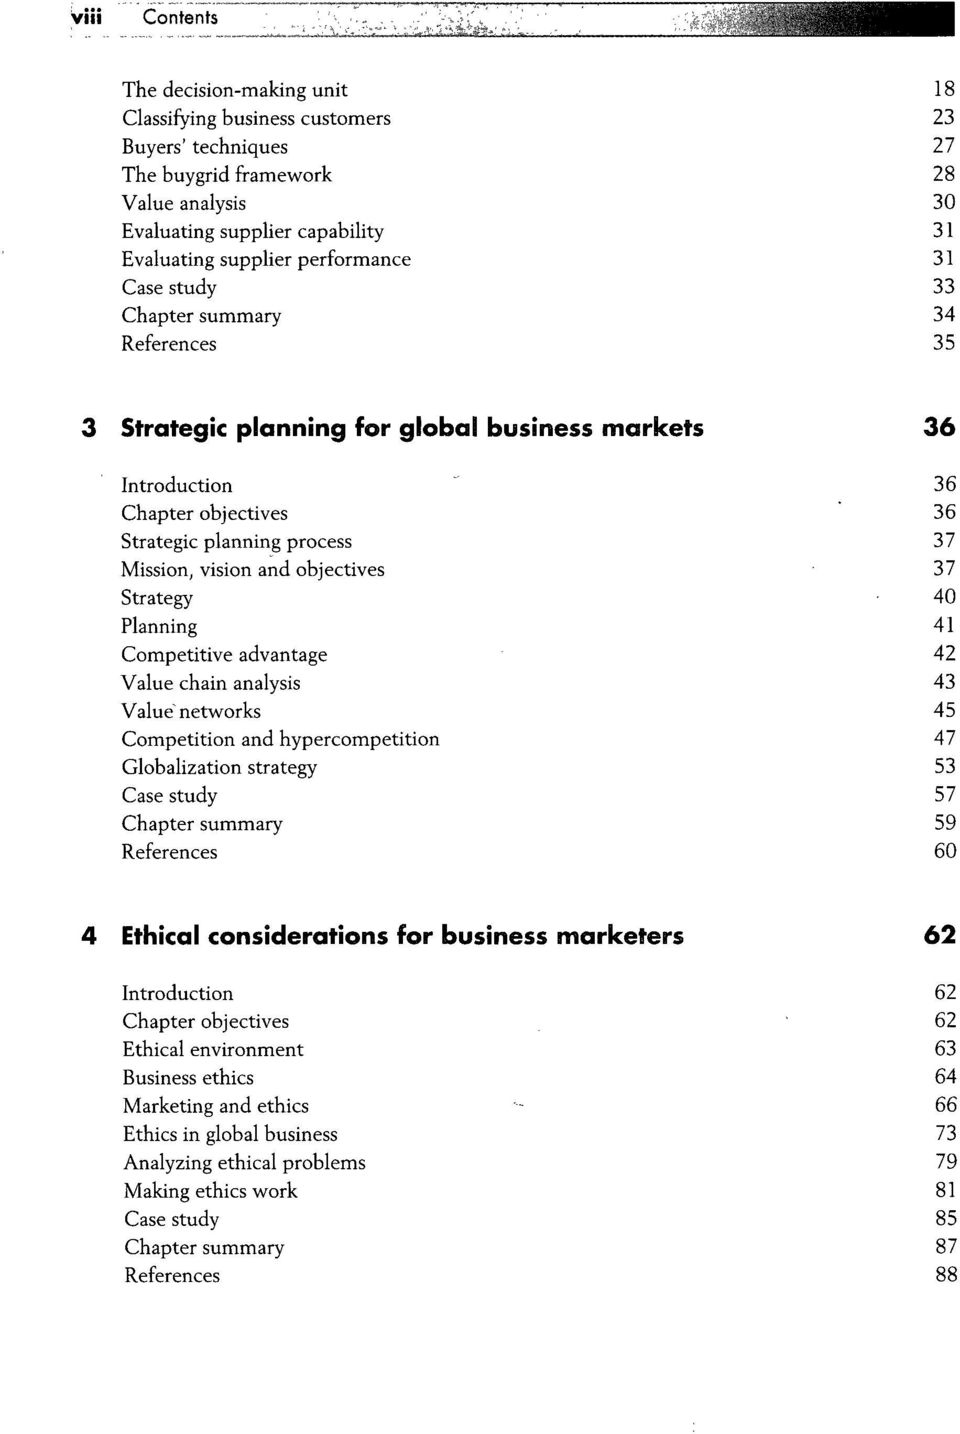 and objectives 37 Strategy 40 Planning 41 Competitive advantage 42 Value chain analysis 43 Value~ networks 45 Competition and hypercompetition 47 Globalization strategy 53 Case study 57 Chapter